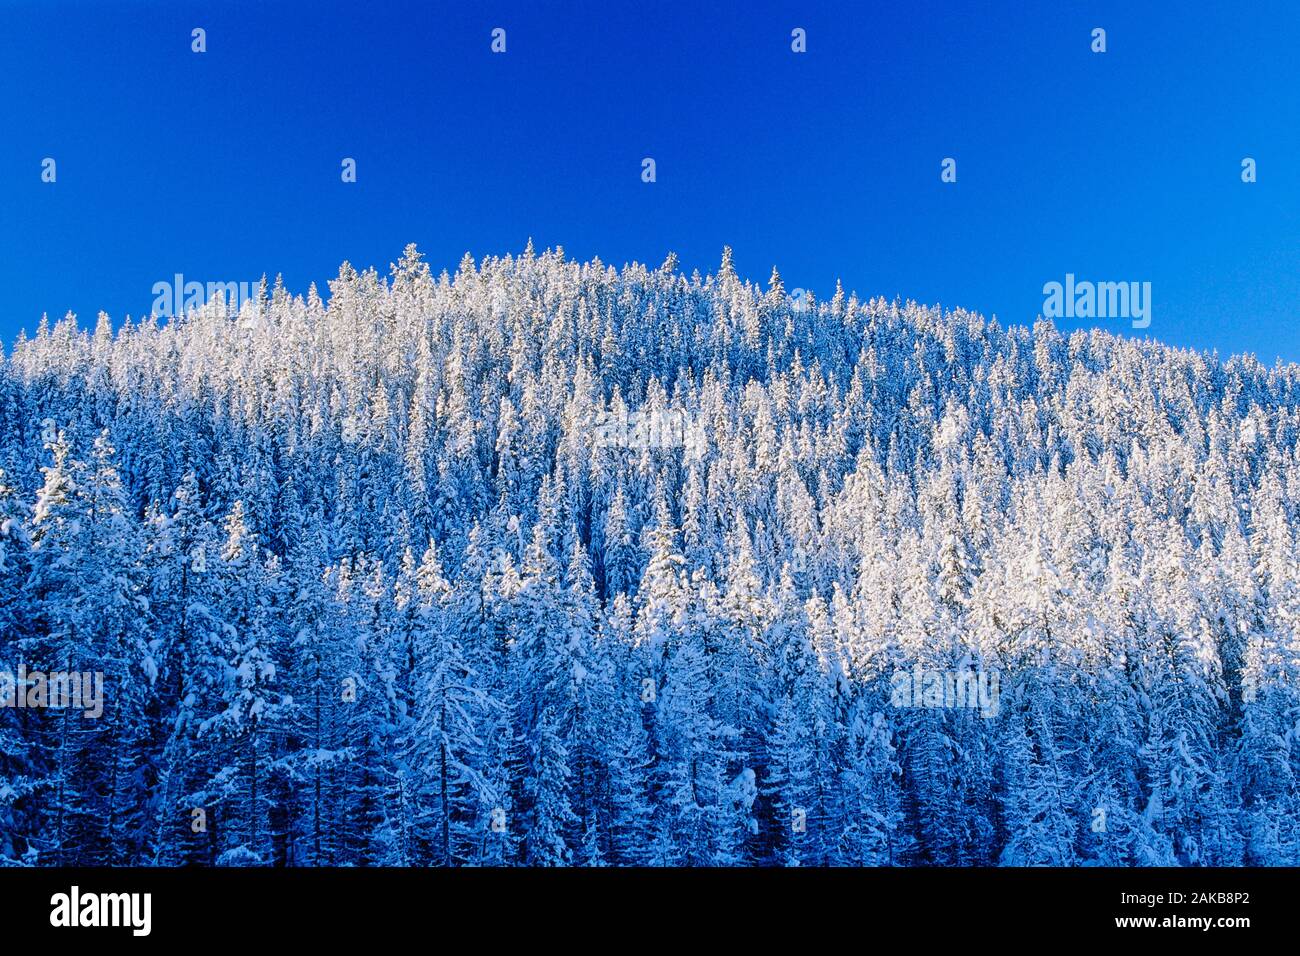 Winter landscape with forest on mountain under clear sky, Bow Summit, Banff National Park, Alberta, Canada Stock Photo